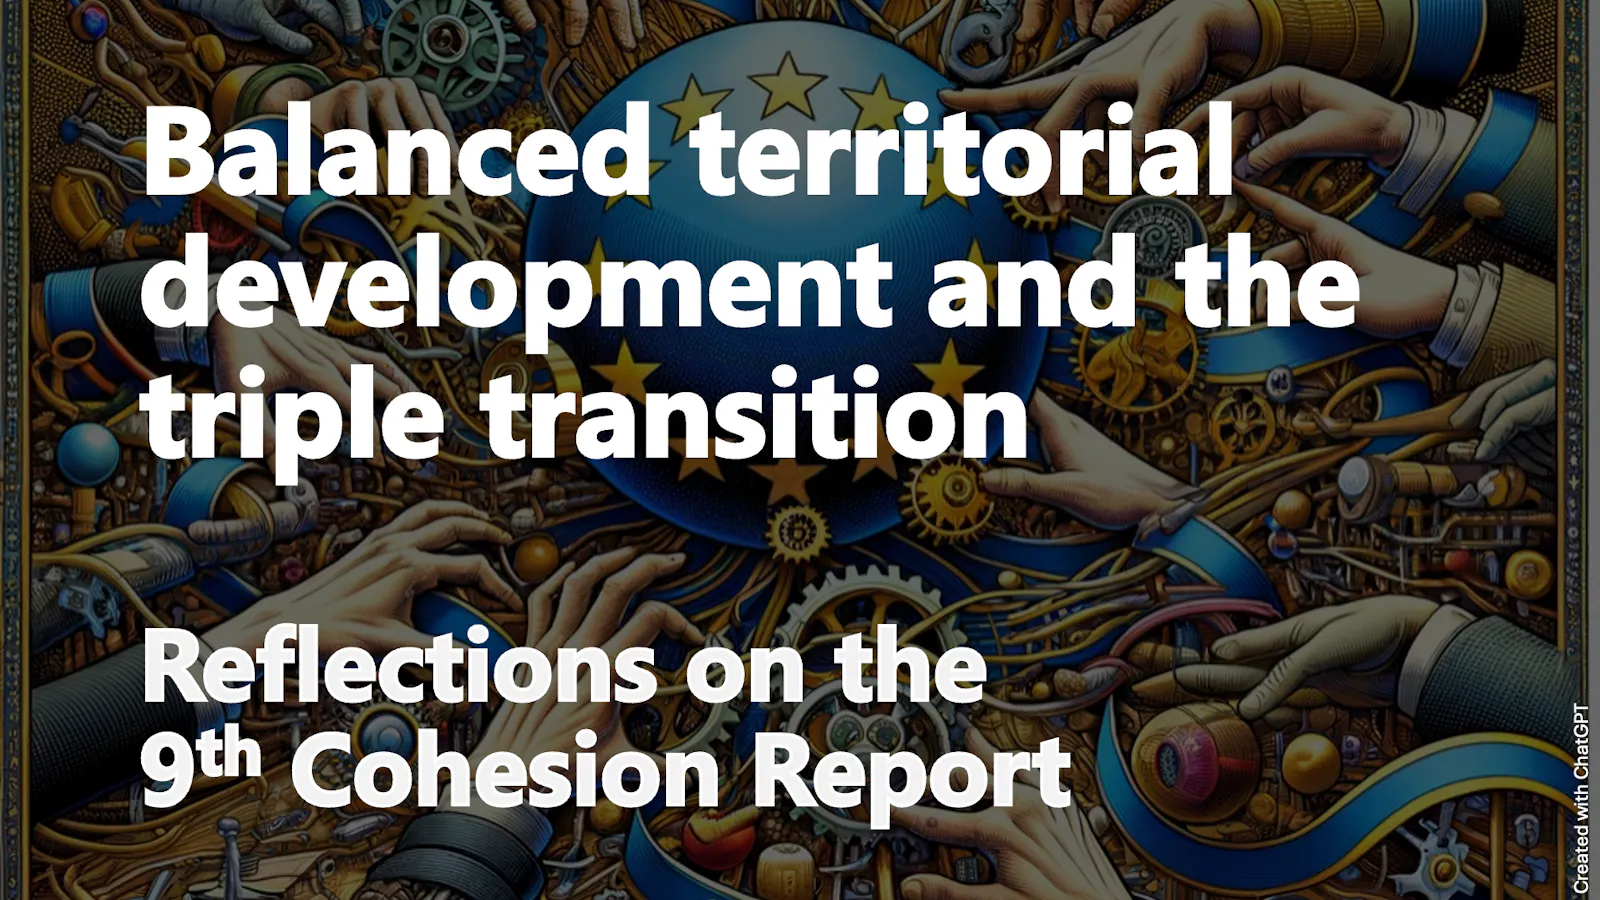 Balanced territorial development and the triple transition. Reflections on the 9th Cohesion Report.